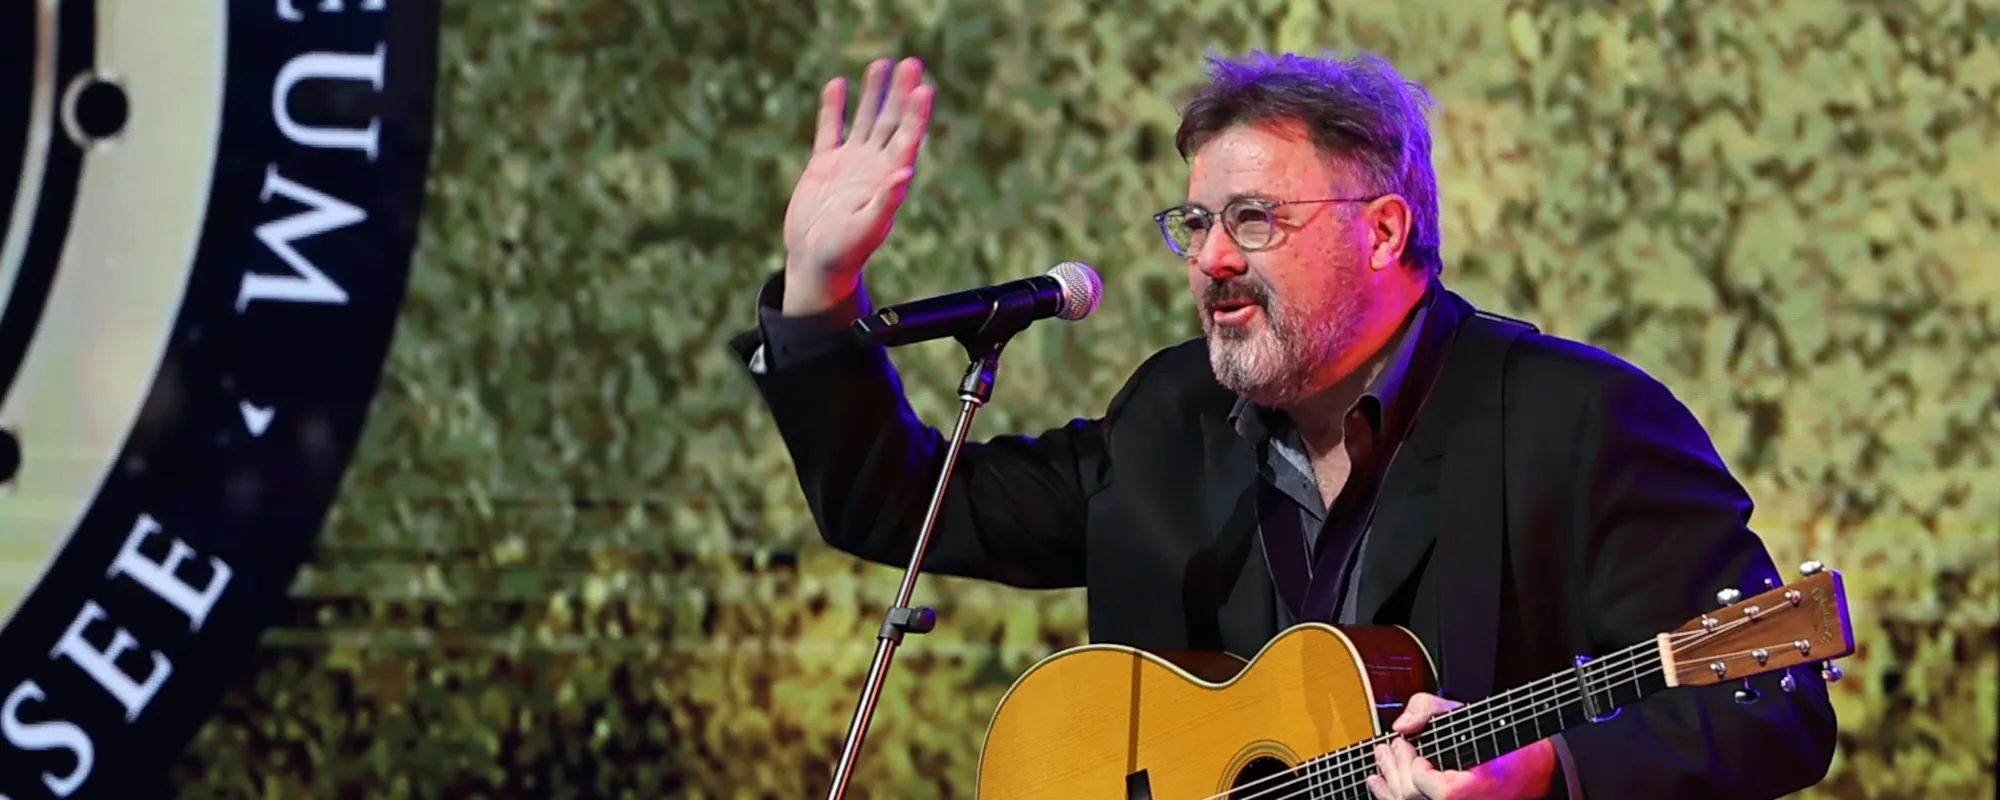 The Meaning Behind “High Lonesome Sound” by Vince Gill